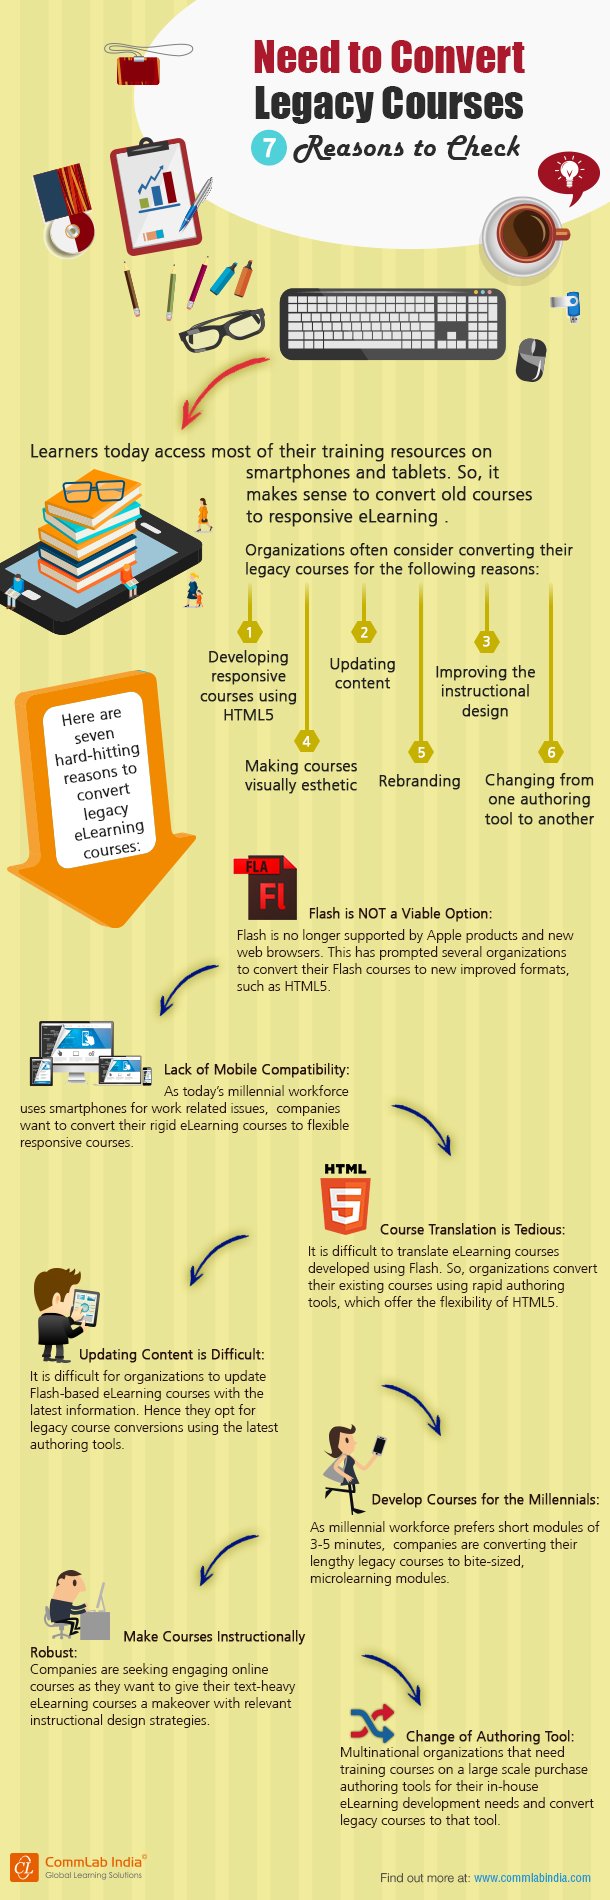 Need to Convert Legacy Courses 7 Reasons to Check [Infographic]